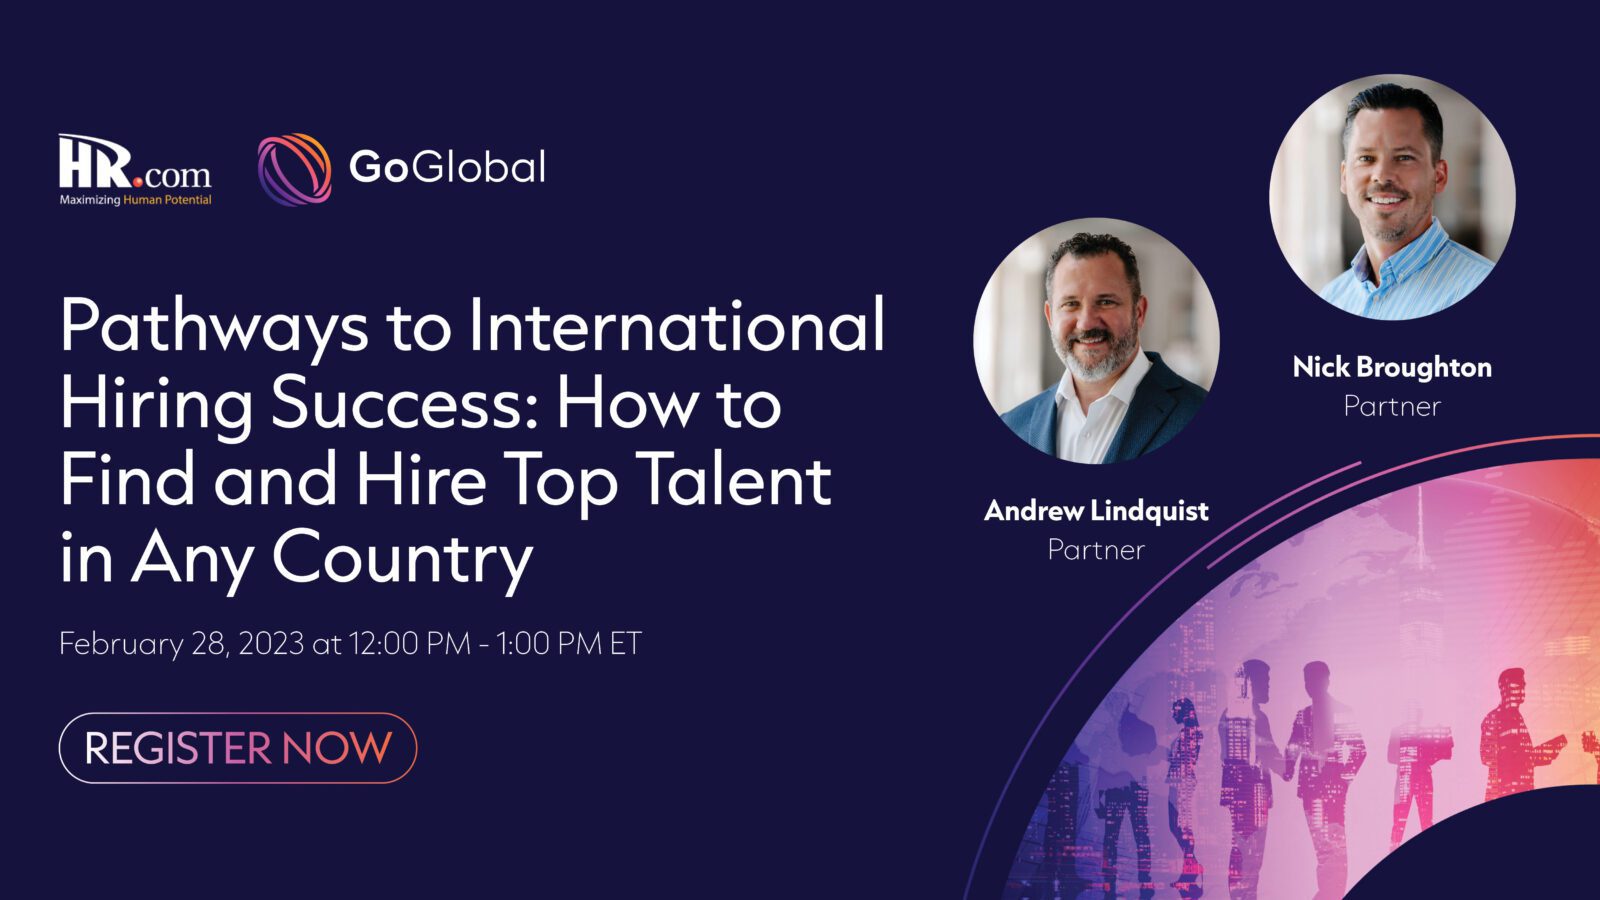 Pathways to International Hiring Success: How to Find and Hire Top Talent in Any Country